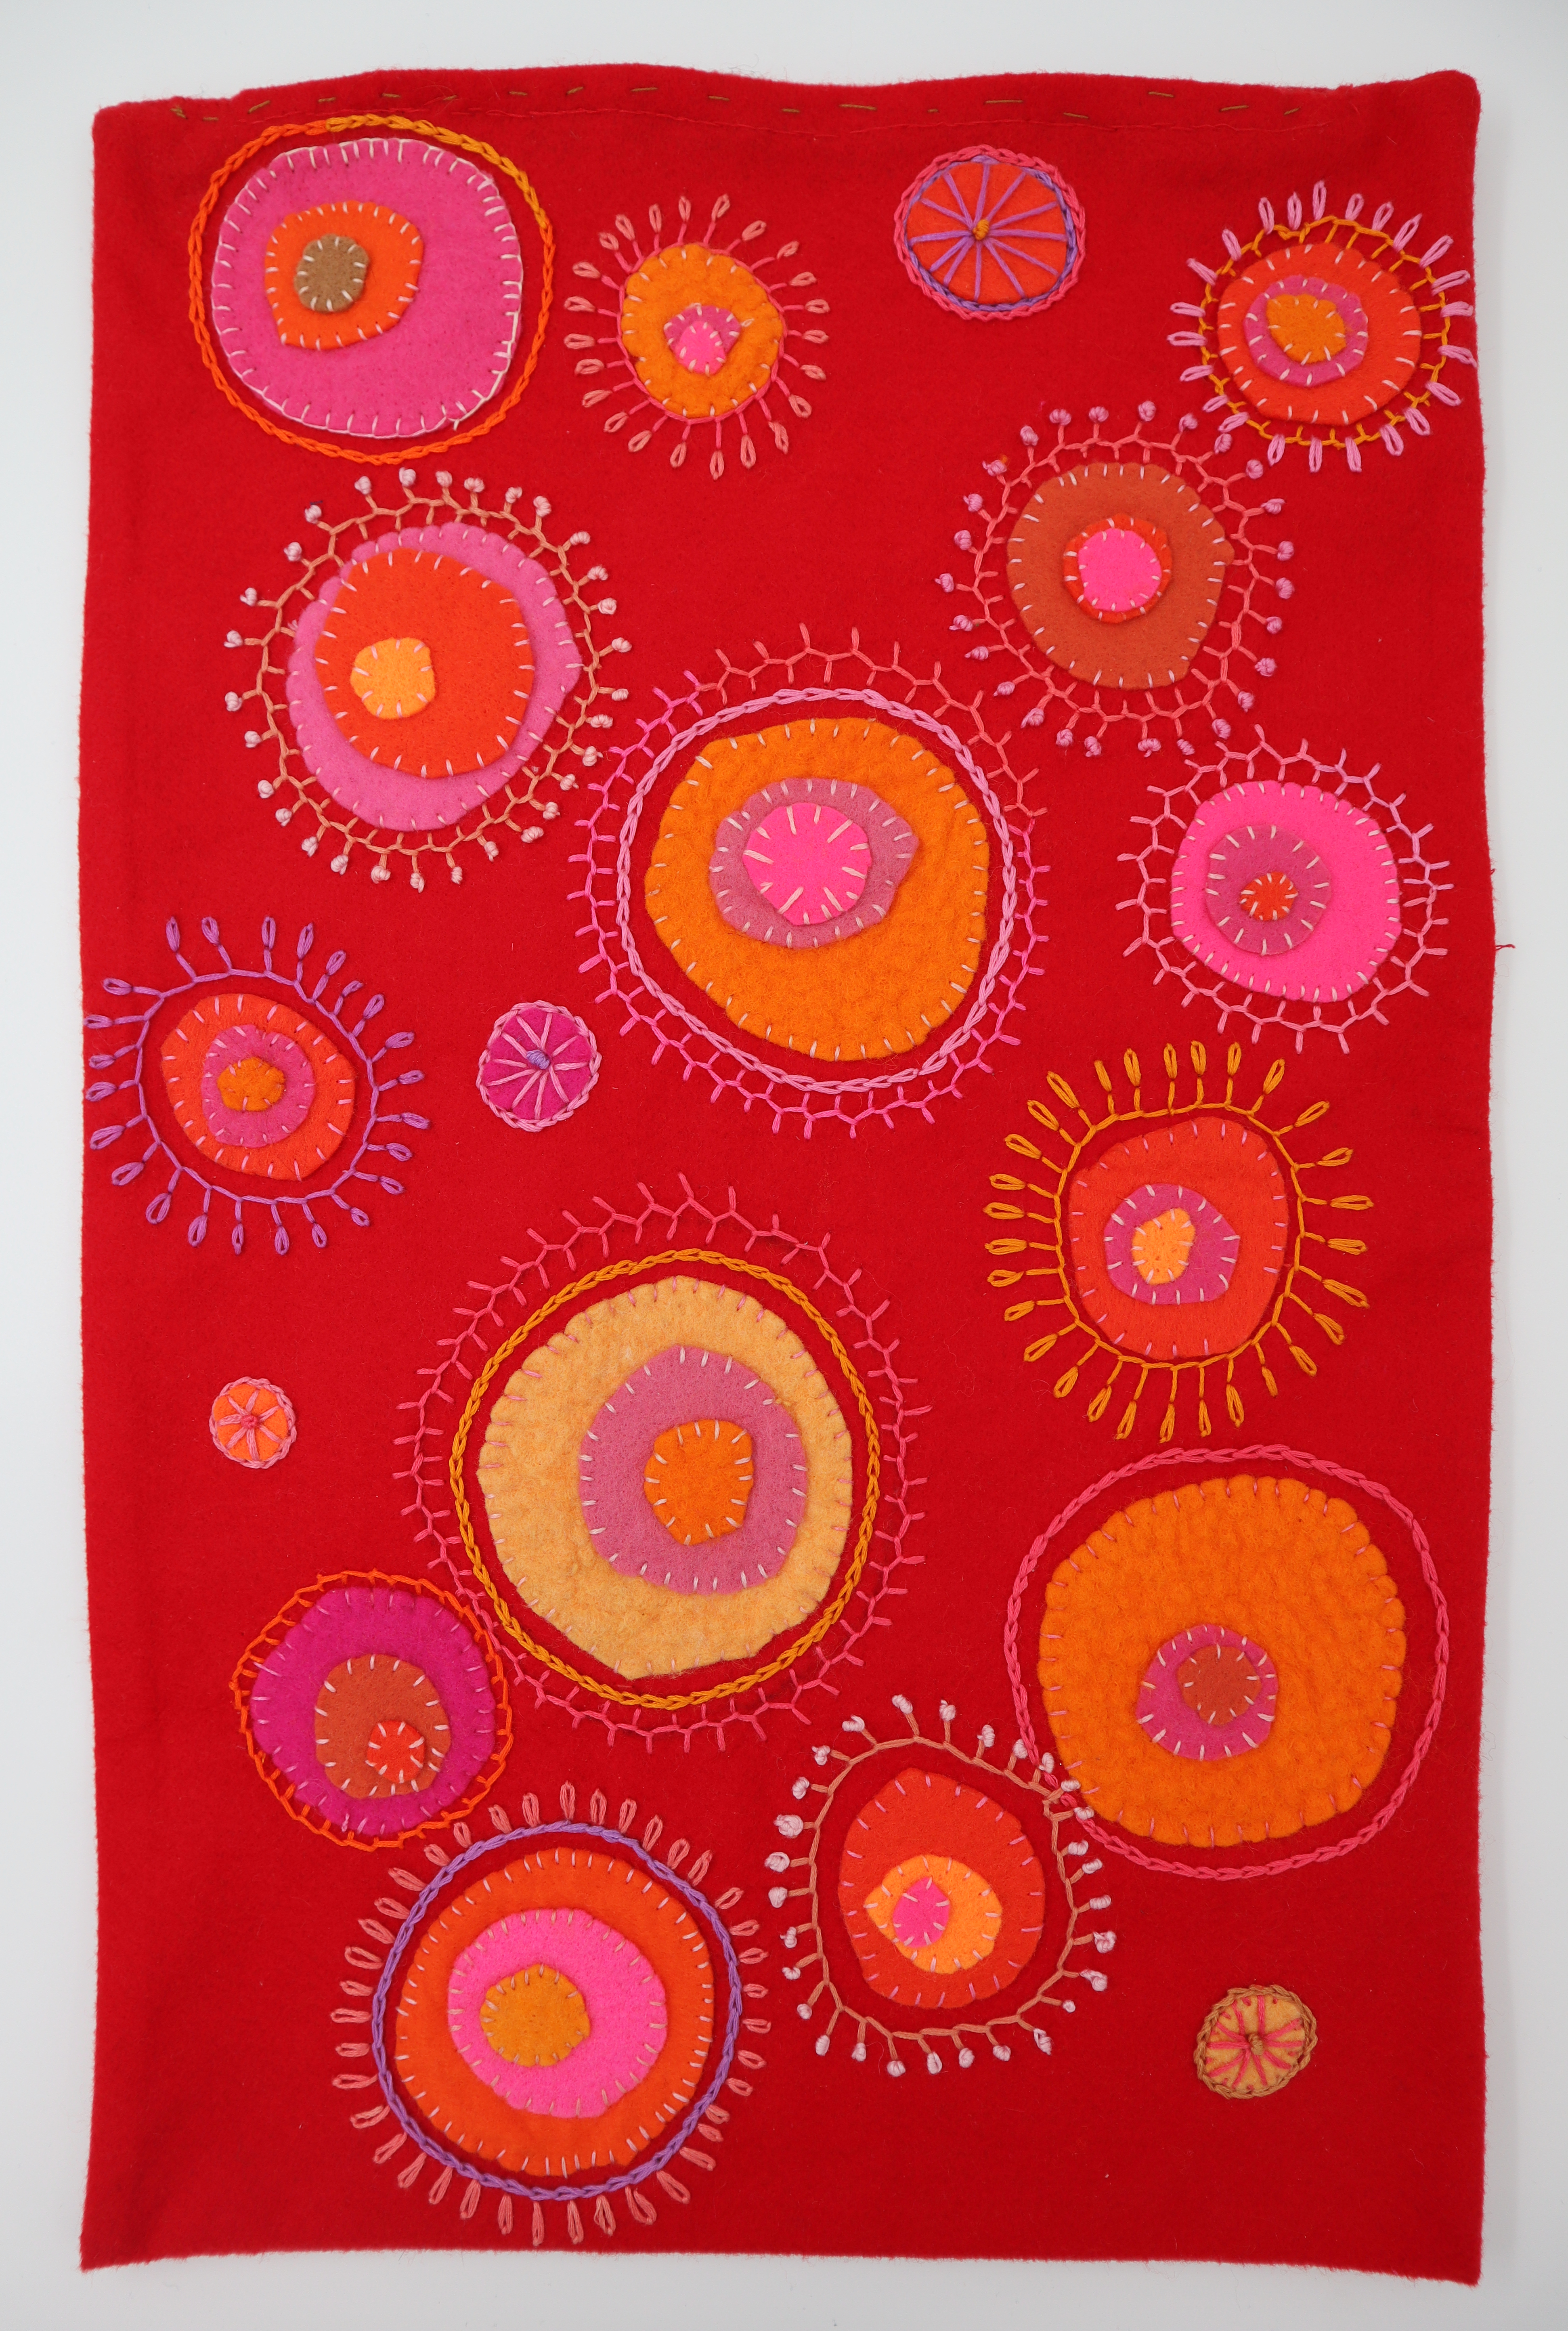 An embroidered cushion cover. Brightly coloured stitching in circular designs on a red felt background